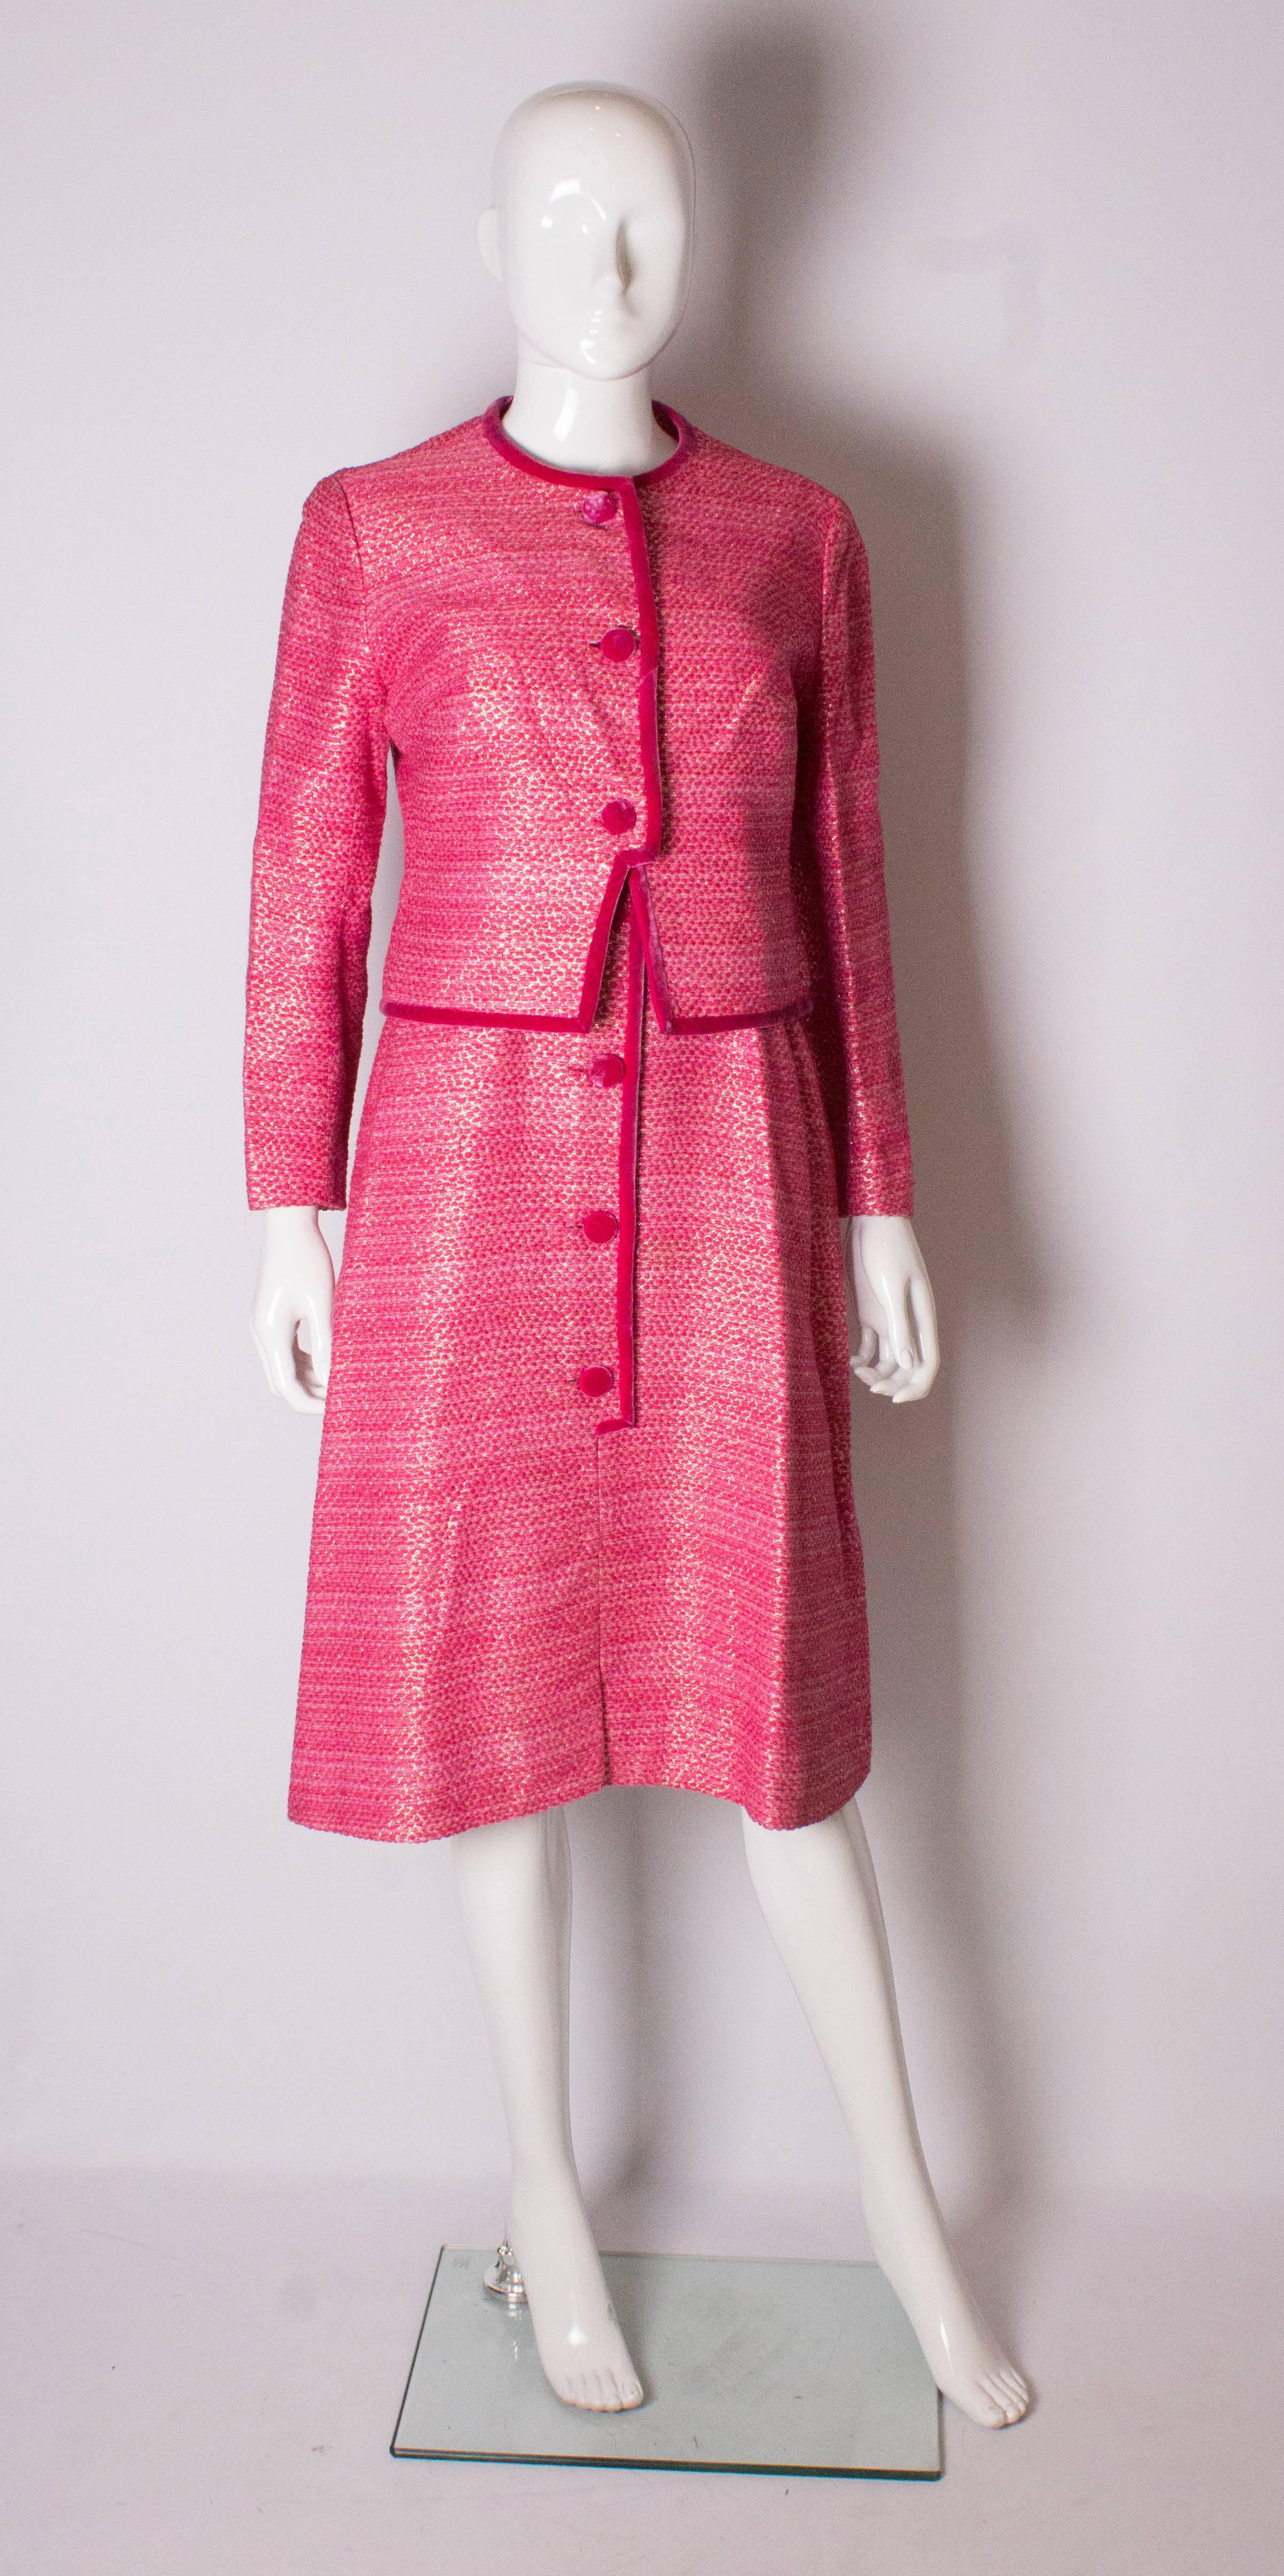 A chic, pink vintage  cocktail dress and jacket by Pierre Celeyre. The jacket has a round neck and is trimmed in pink velvet around the collar, front and hem. It has a three button central opening.
The dress has a pink satin bodice and side zip. The